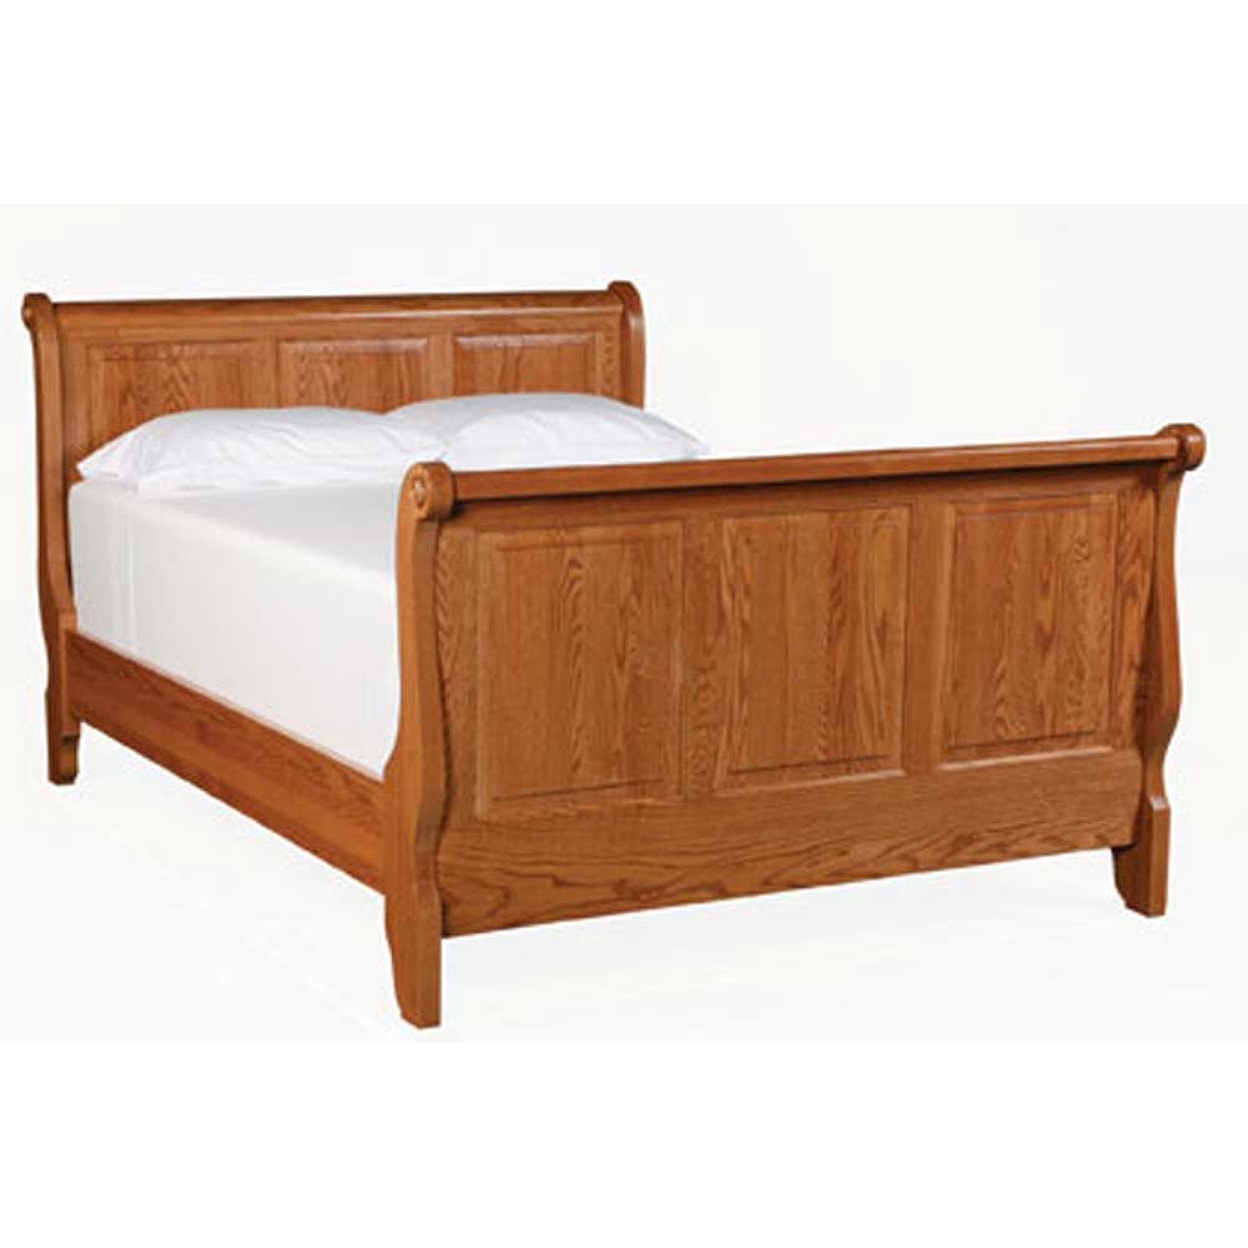 Simply Amish Heritage Amish King Raised Panel Sleigh Bed